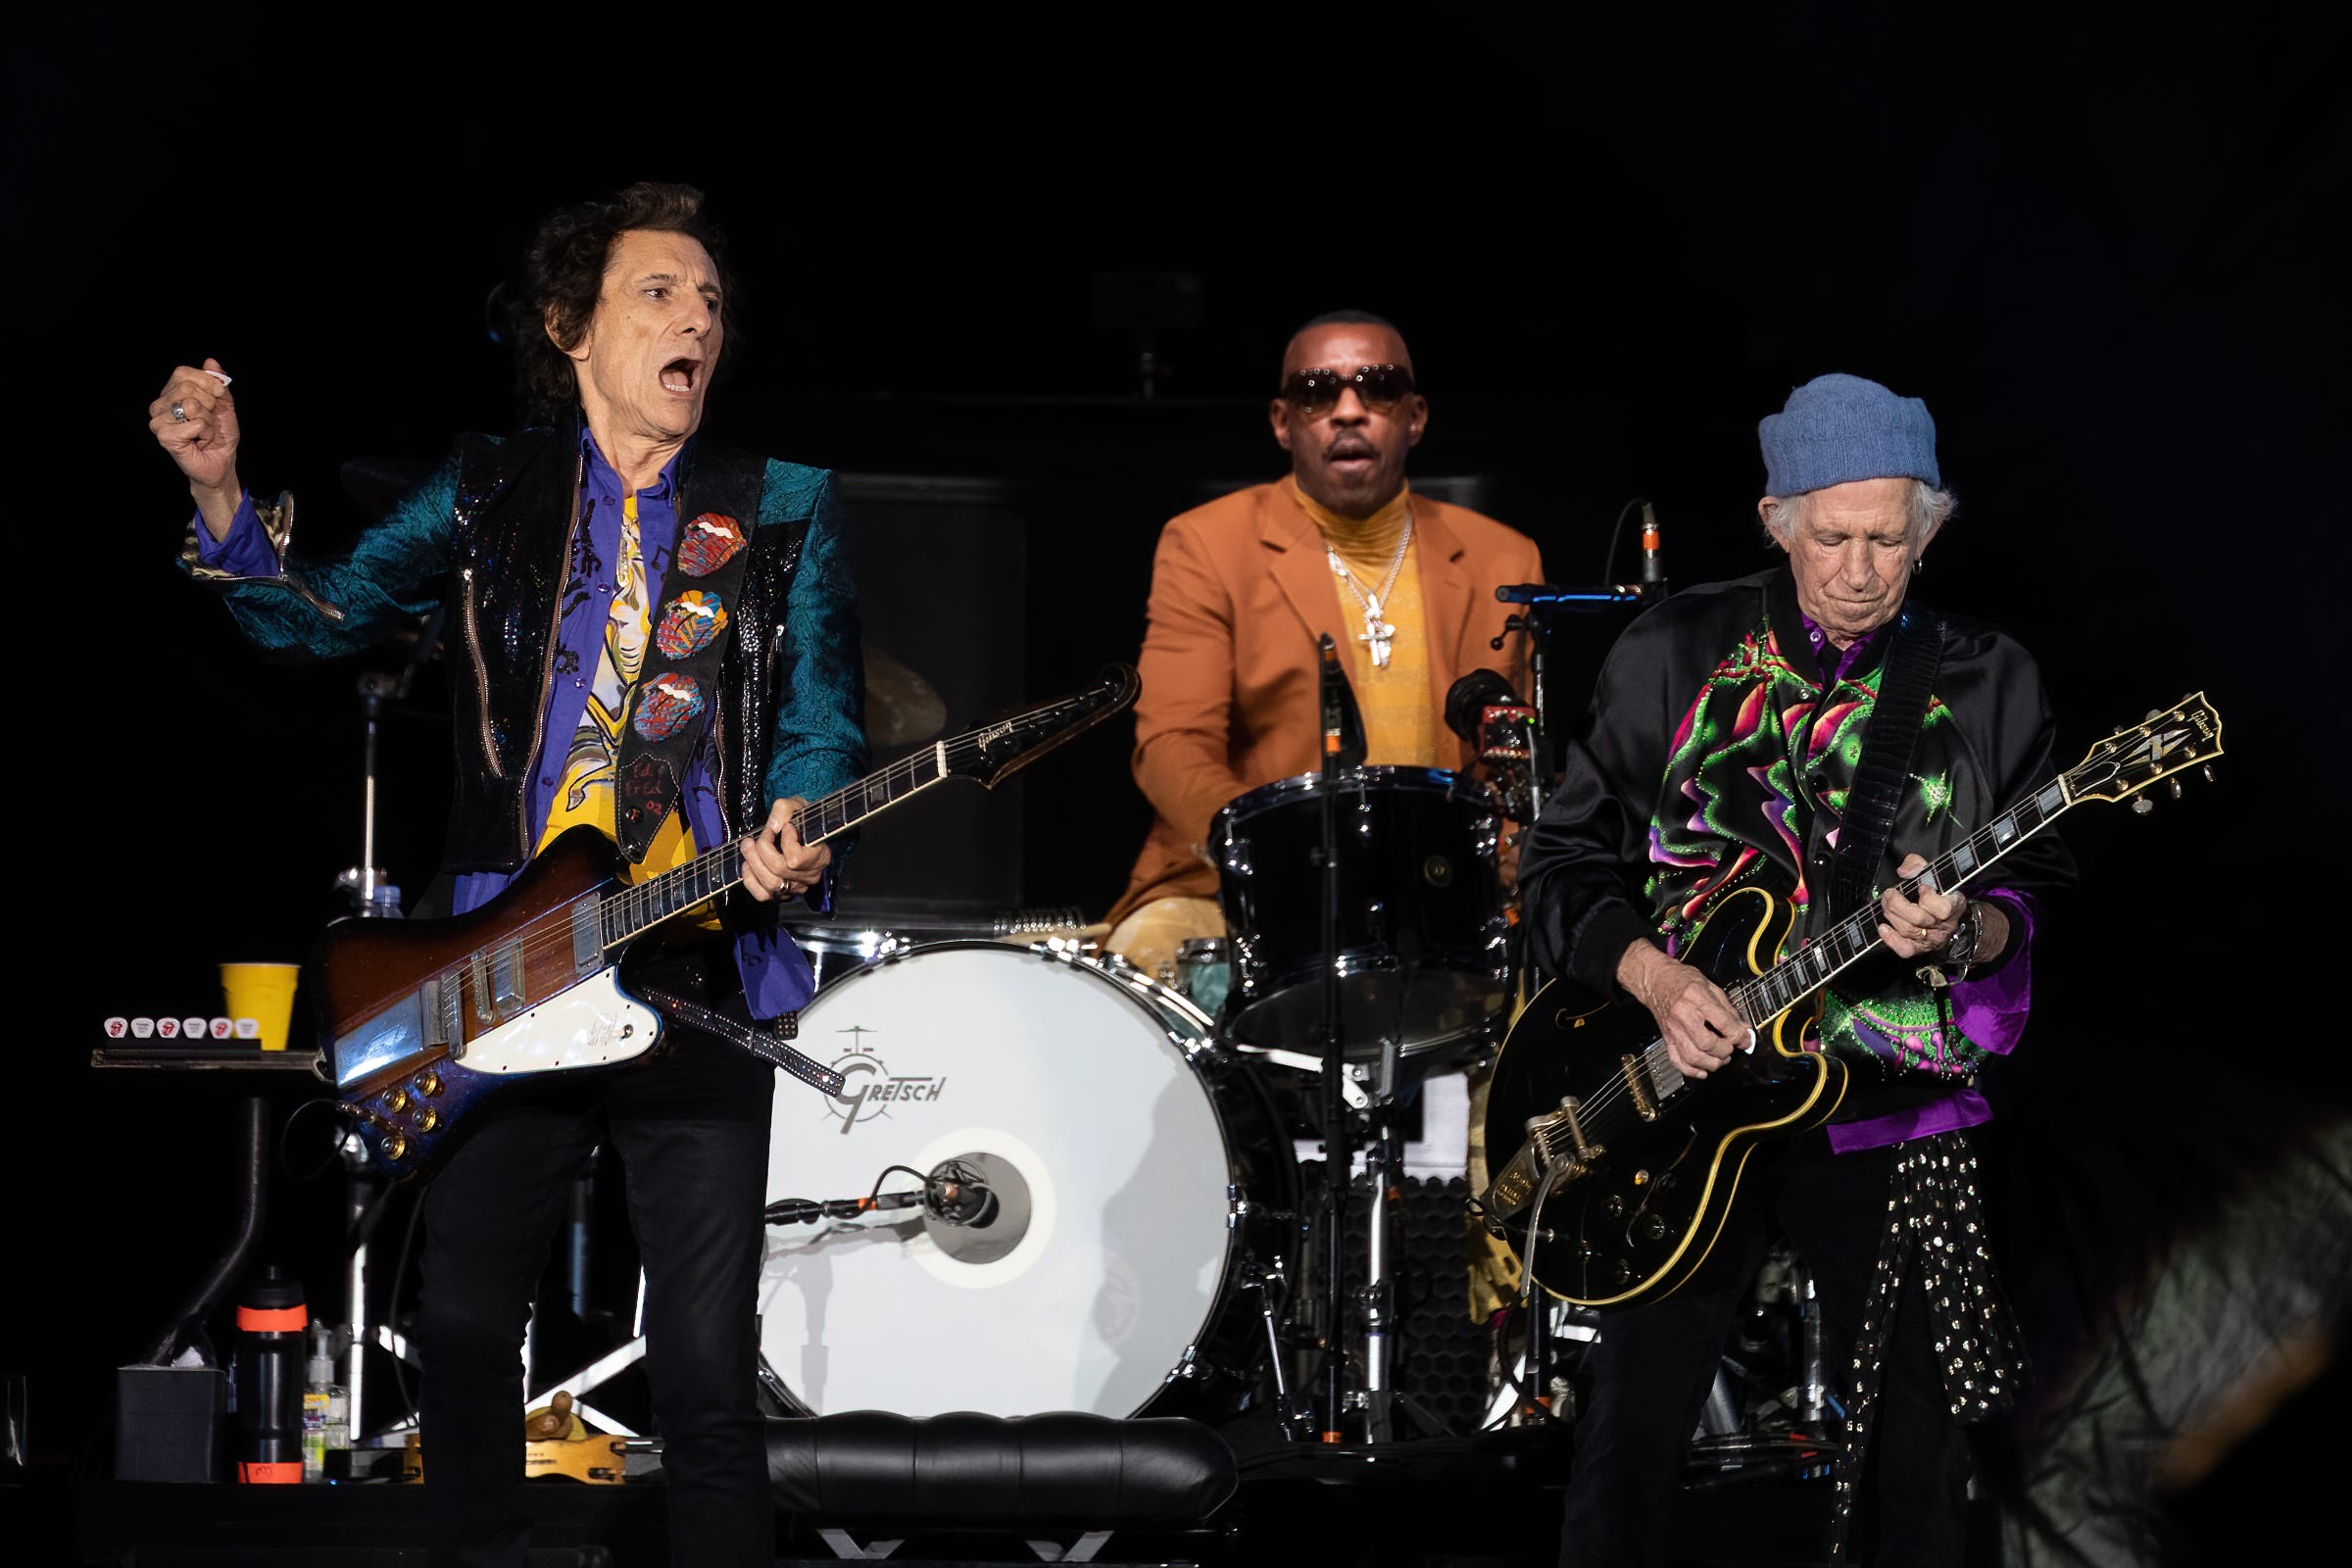 Ron Wood, from left, Steve Jordan and Keith Richards of the Rolling Stones perform at Circuit of the Americas on Nov. 20, 2021, in Austin, Texas.